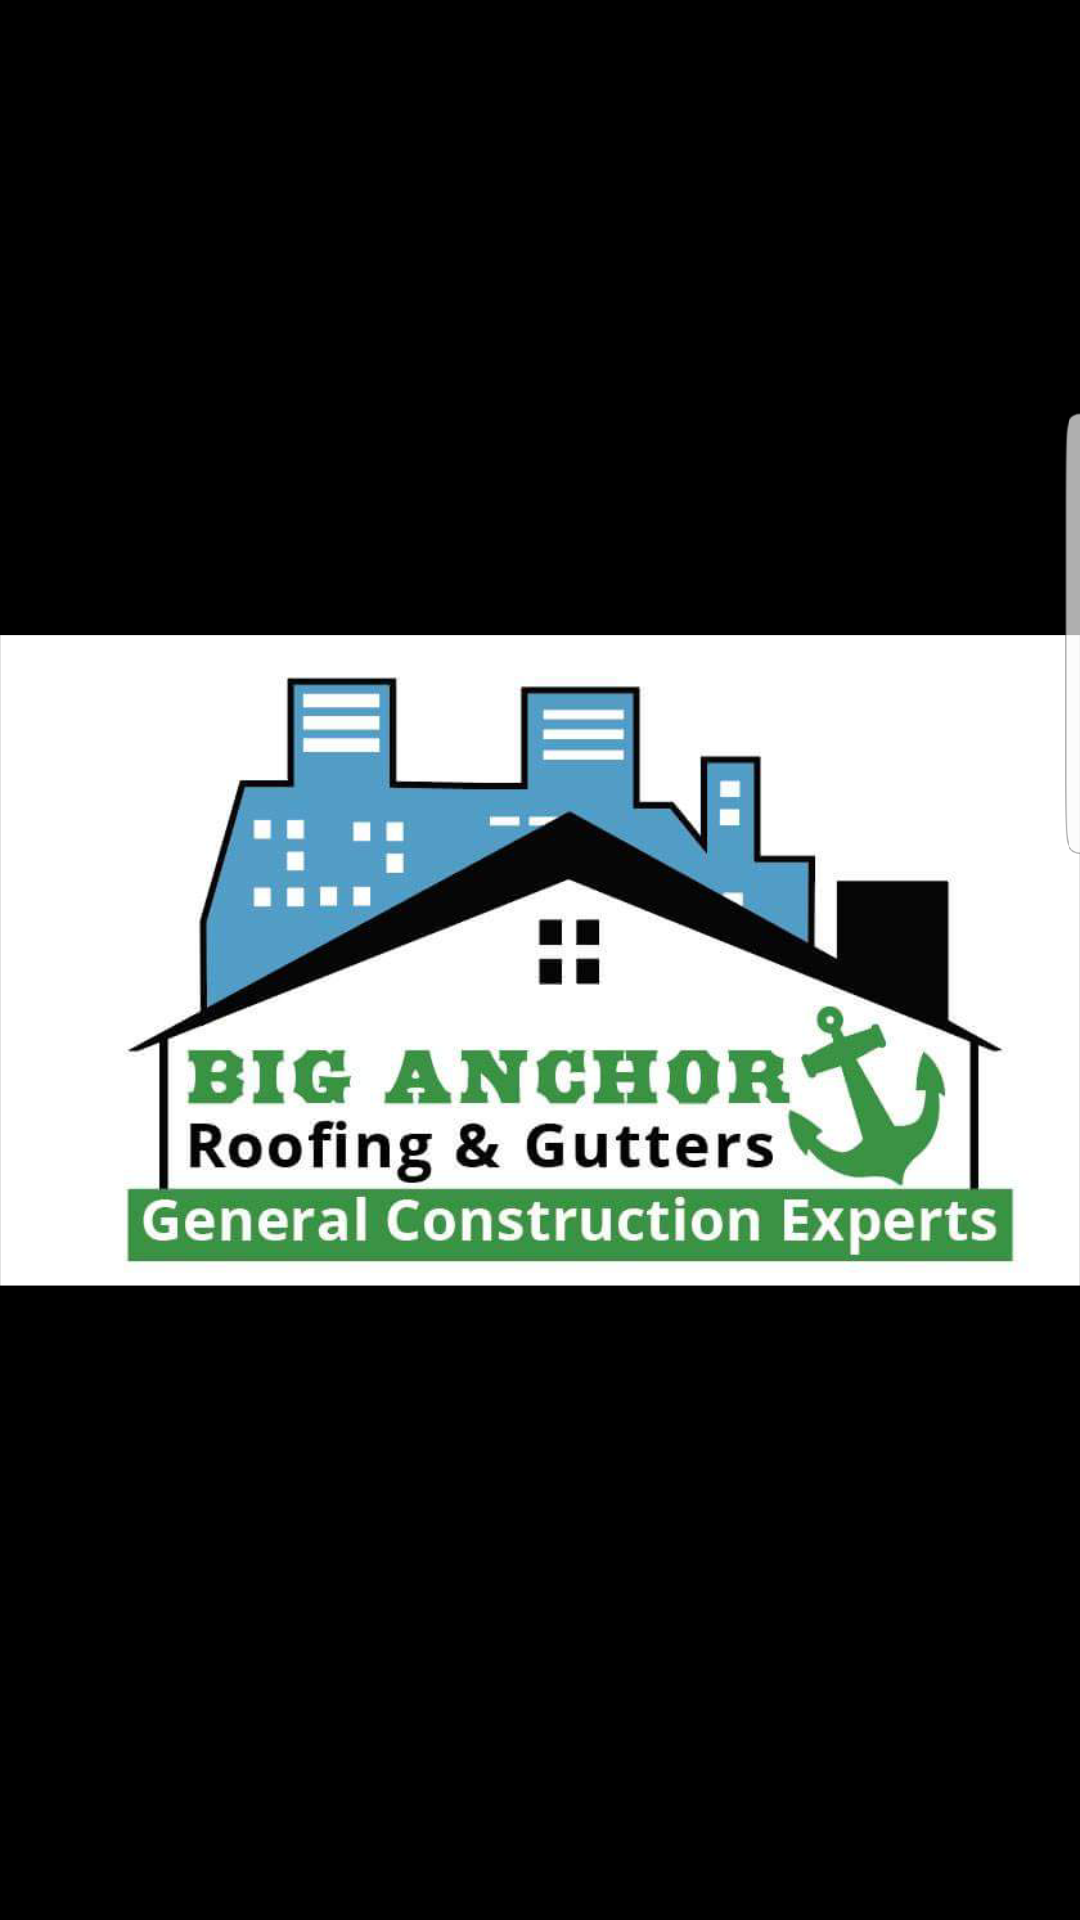 Big Anchor Roofing & Gutters Logo